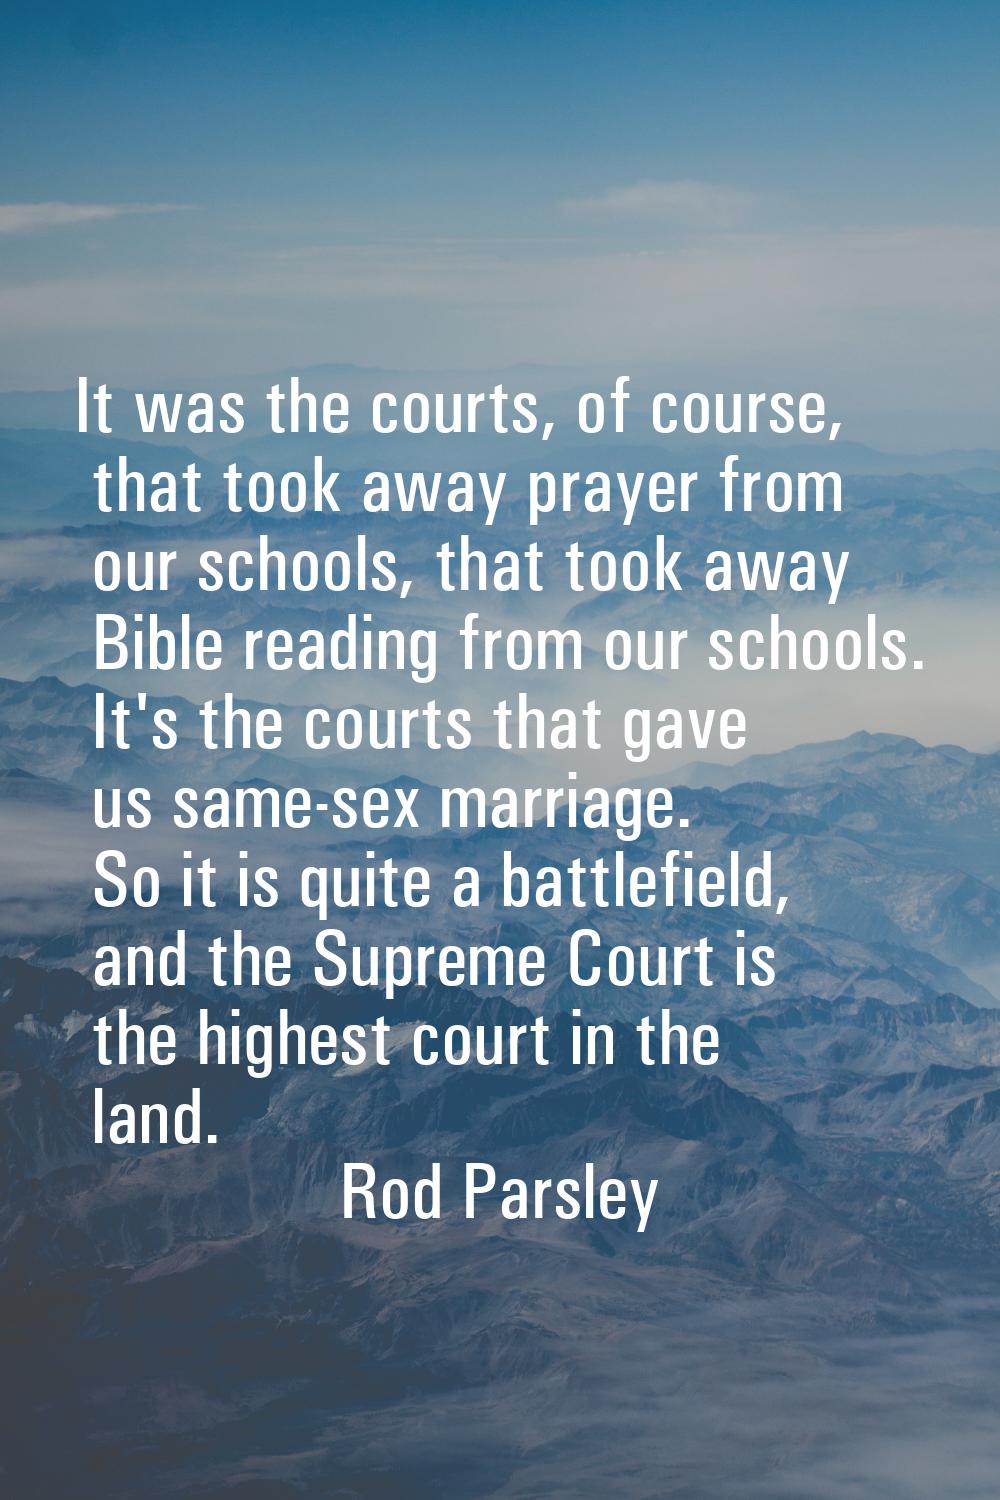 It was the courts, of course, that took away prayer from our schools, that took away Bible reading 